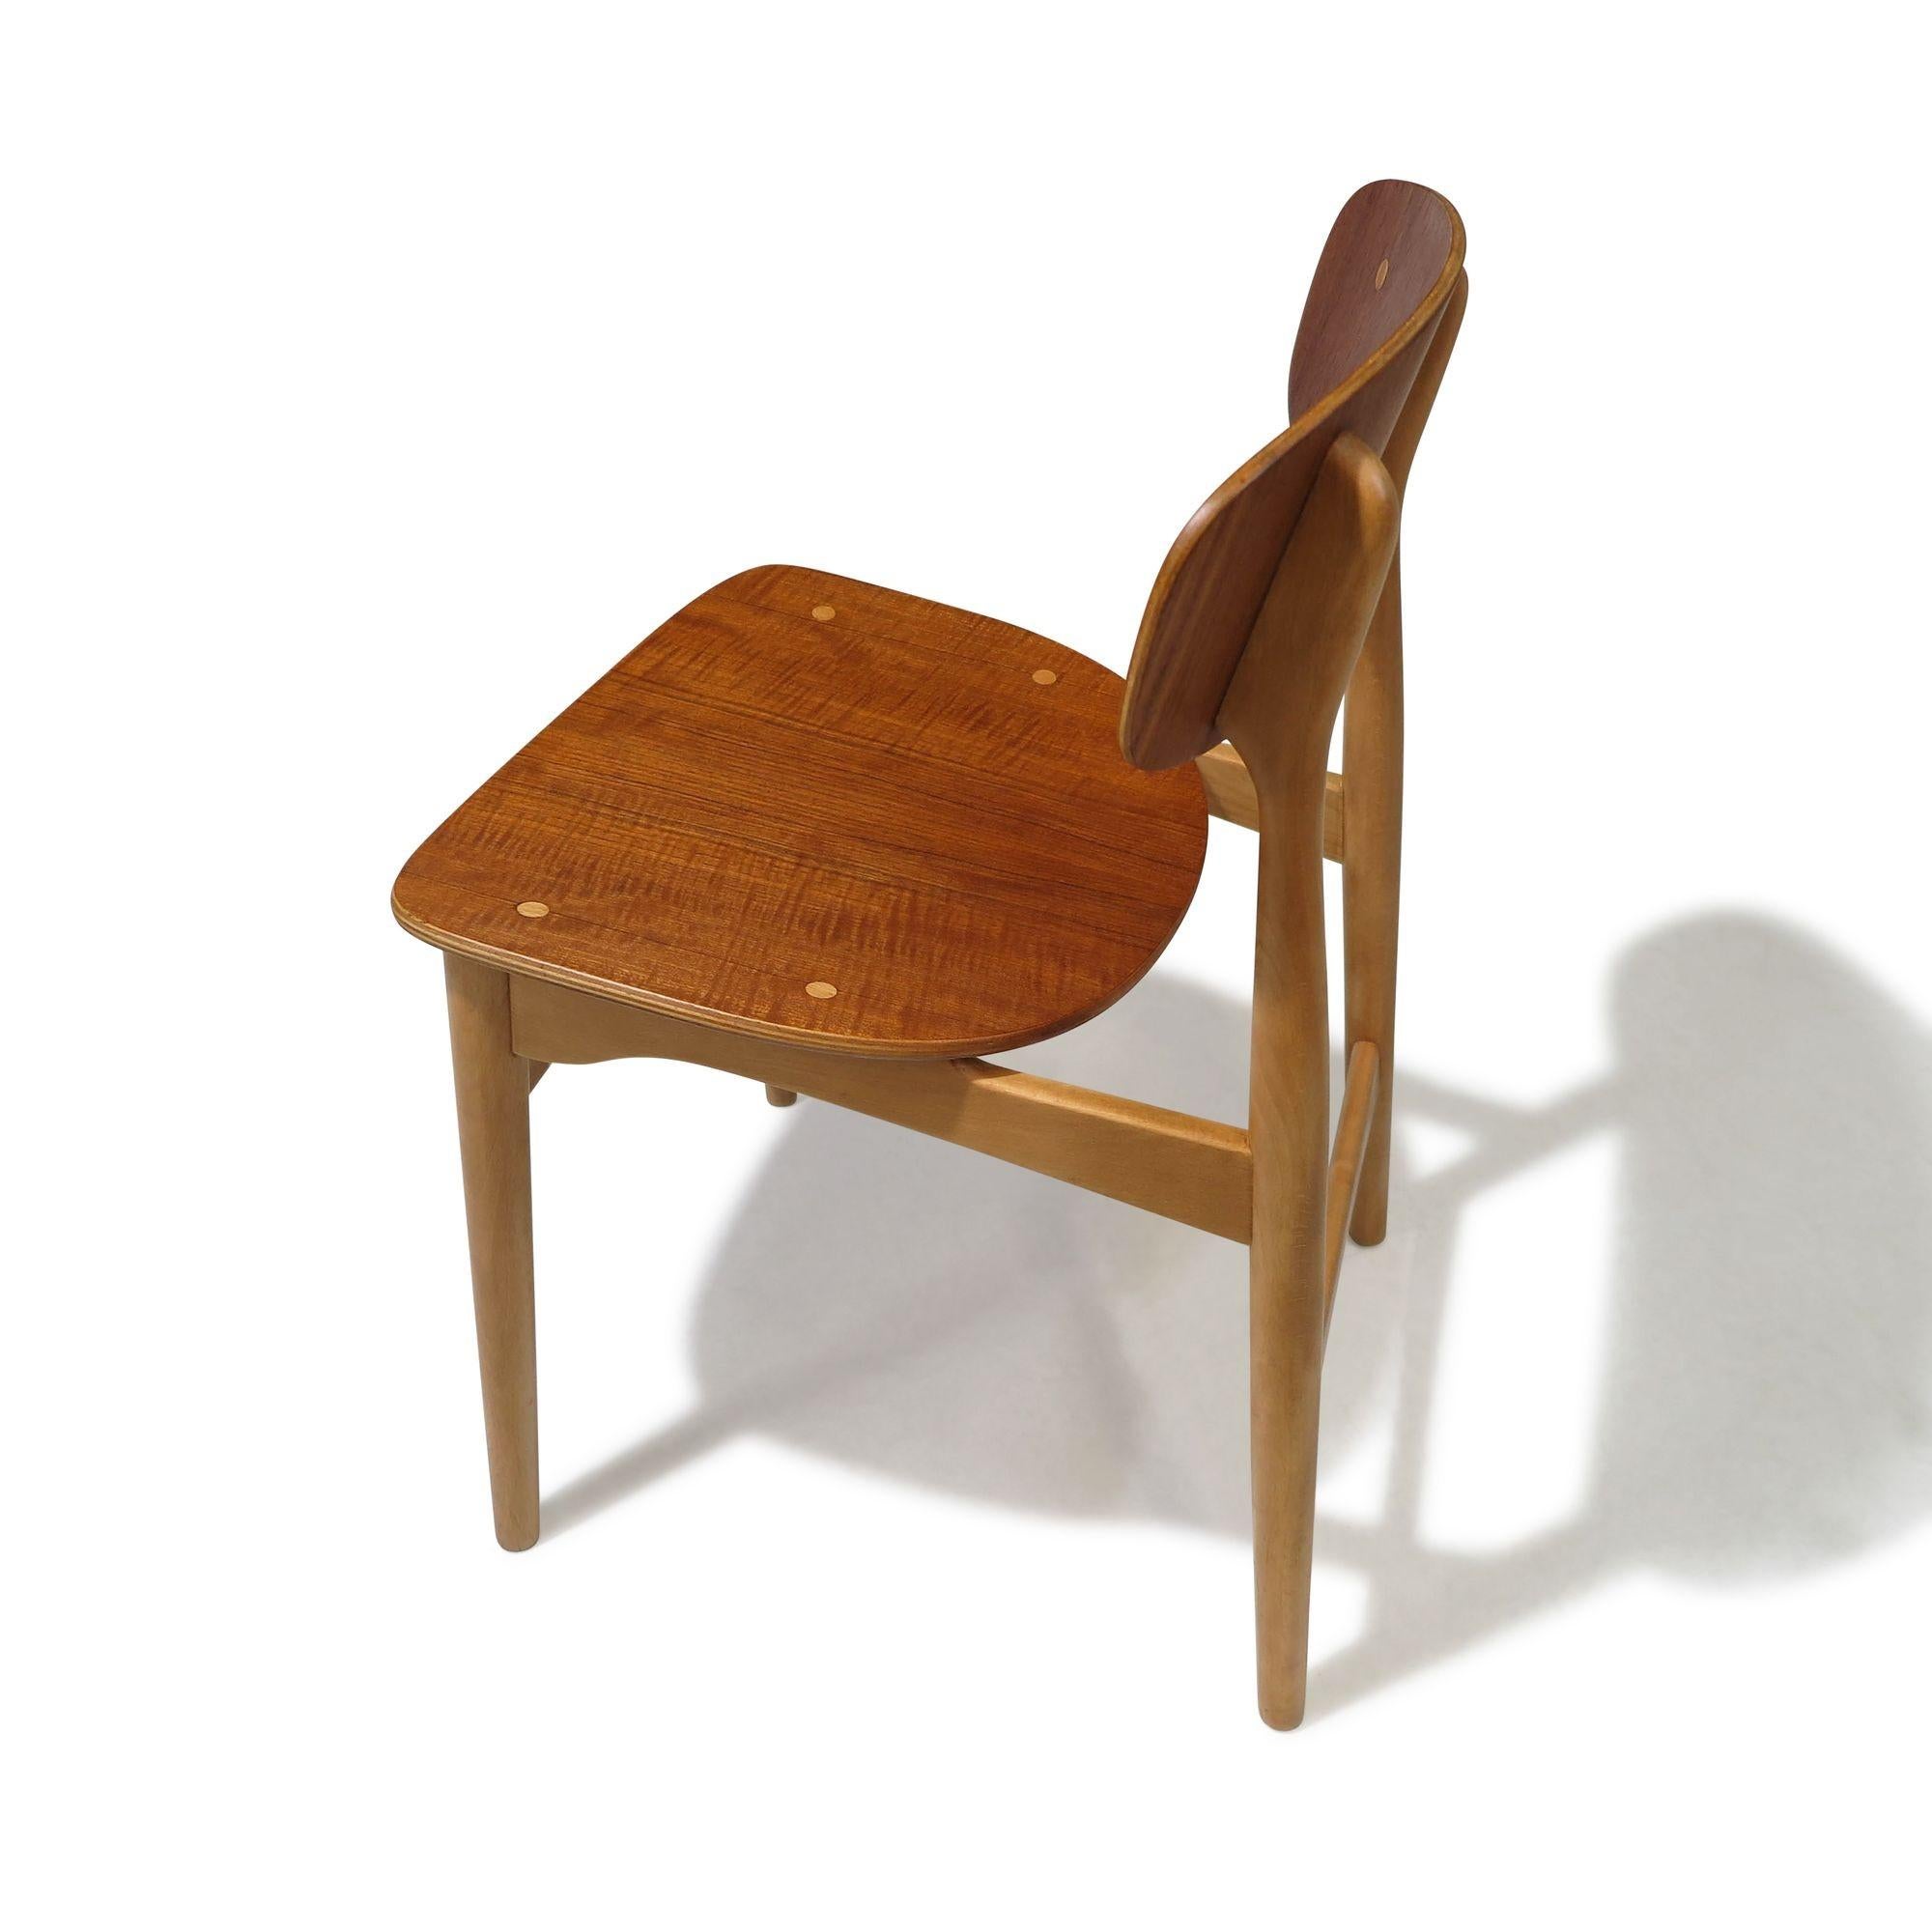 Eight Jens Hjorth Beech and Teak Mid-century Danish Dining Chairs For Sale 3